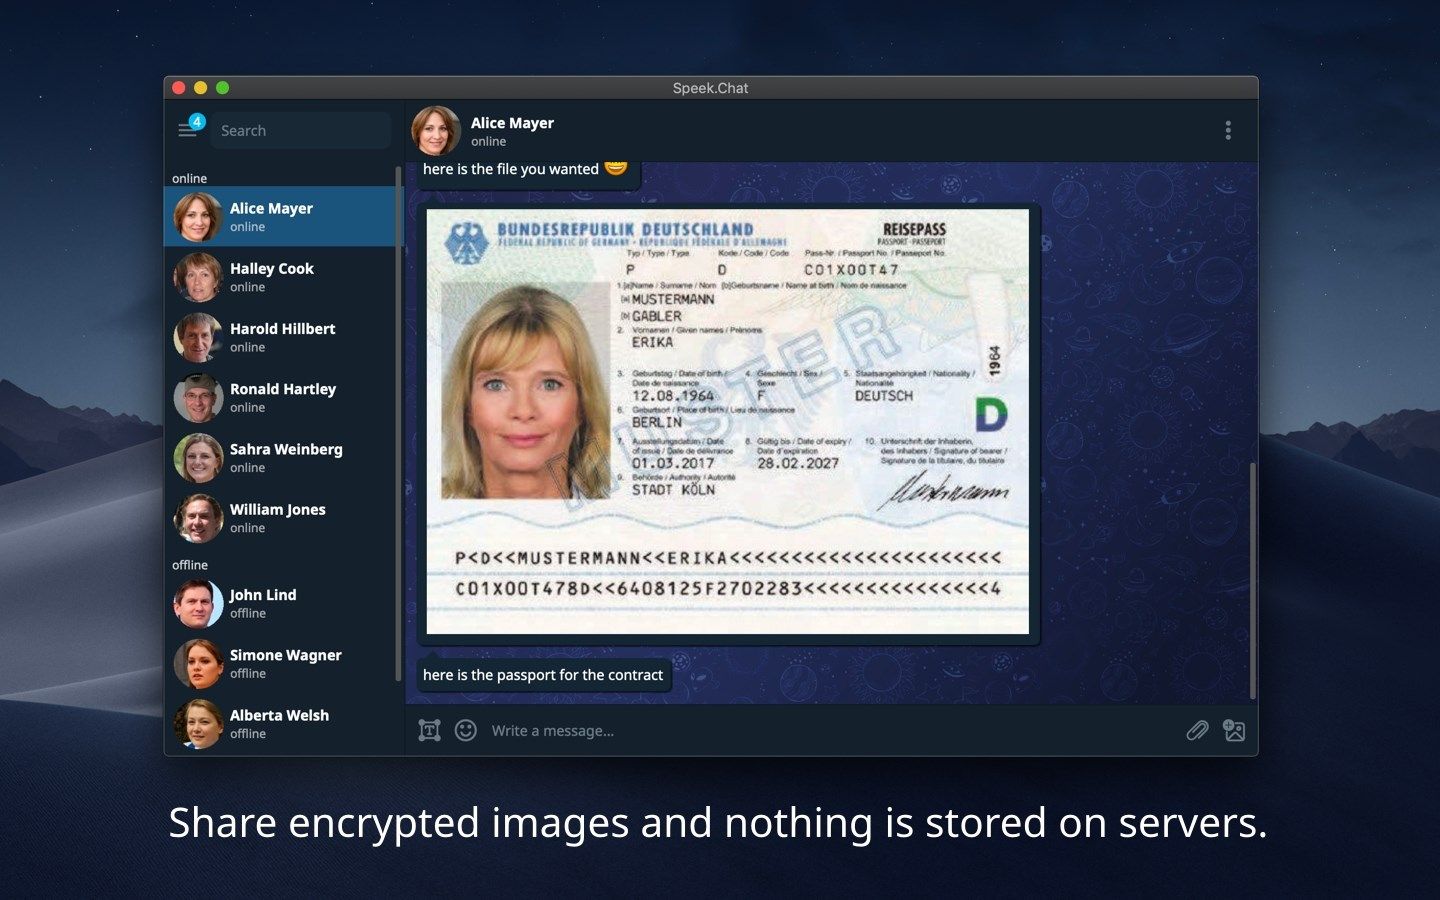 Share encrypted images and nothing is stored on servers.